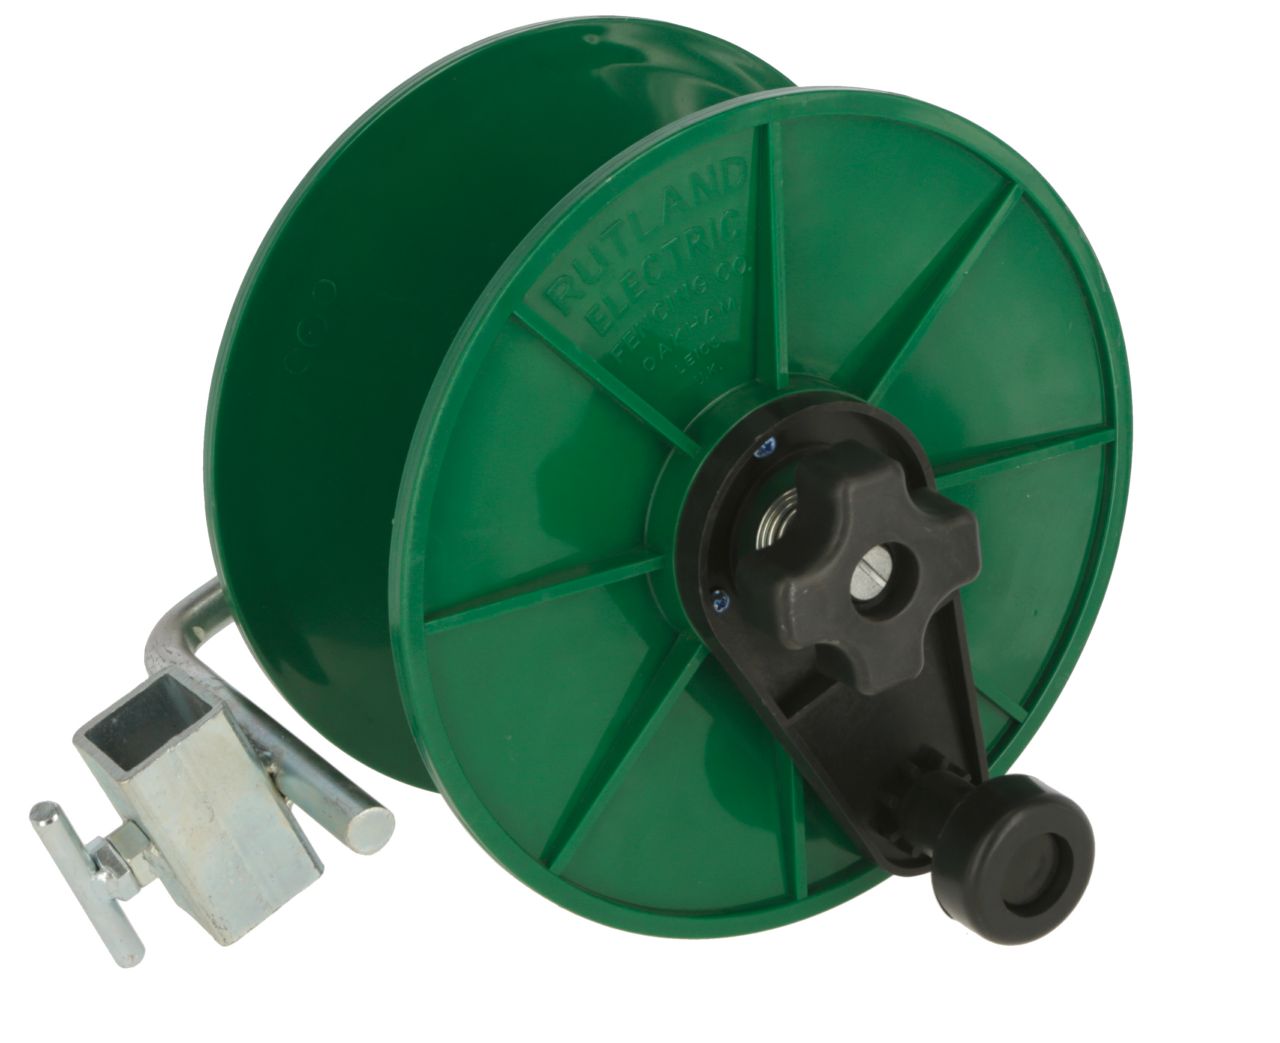 Post Mounted Self-Insulated Reel